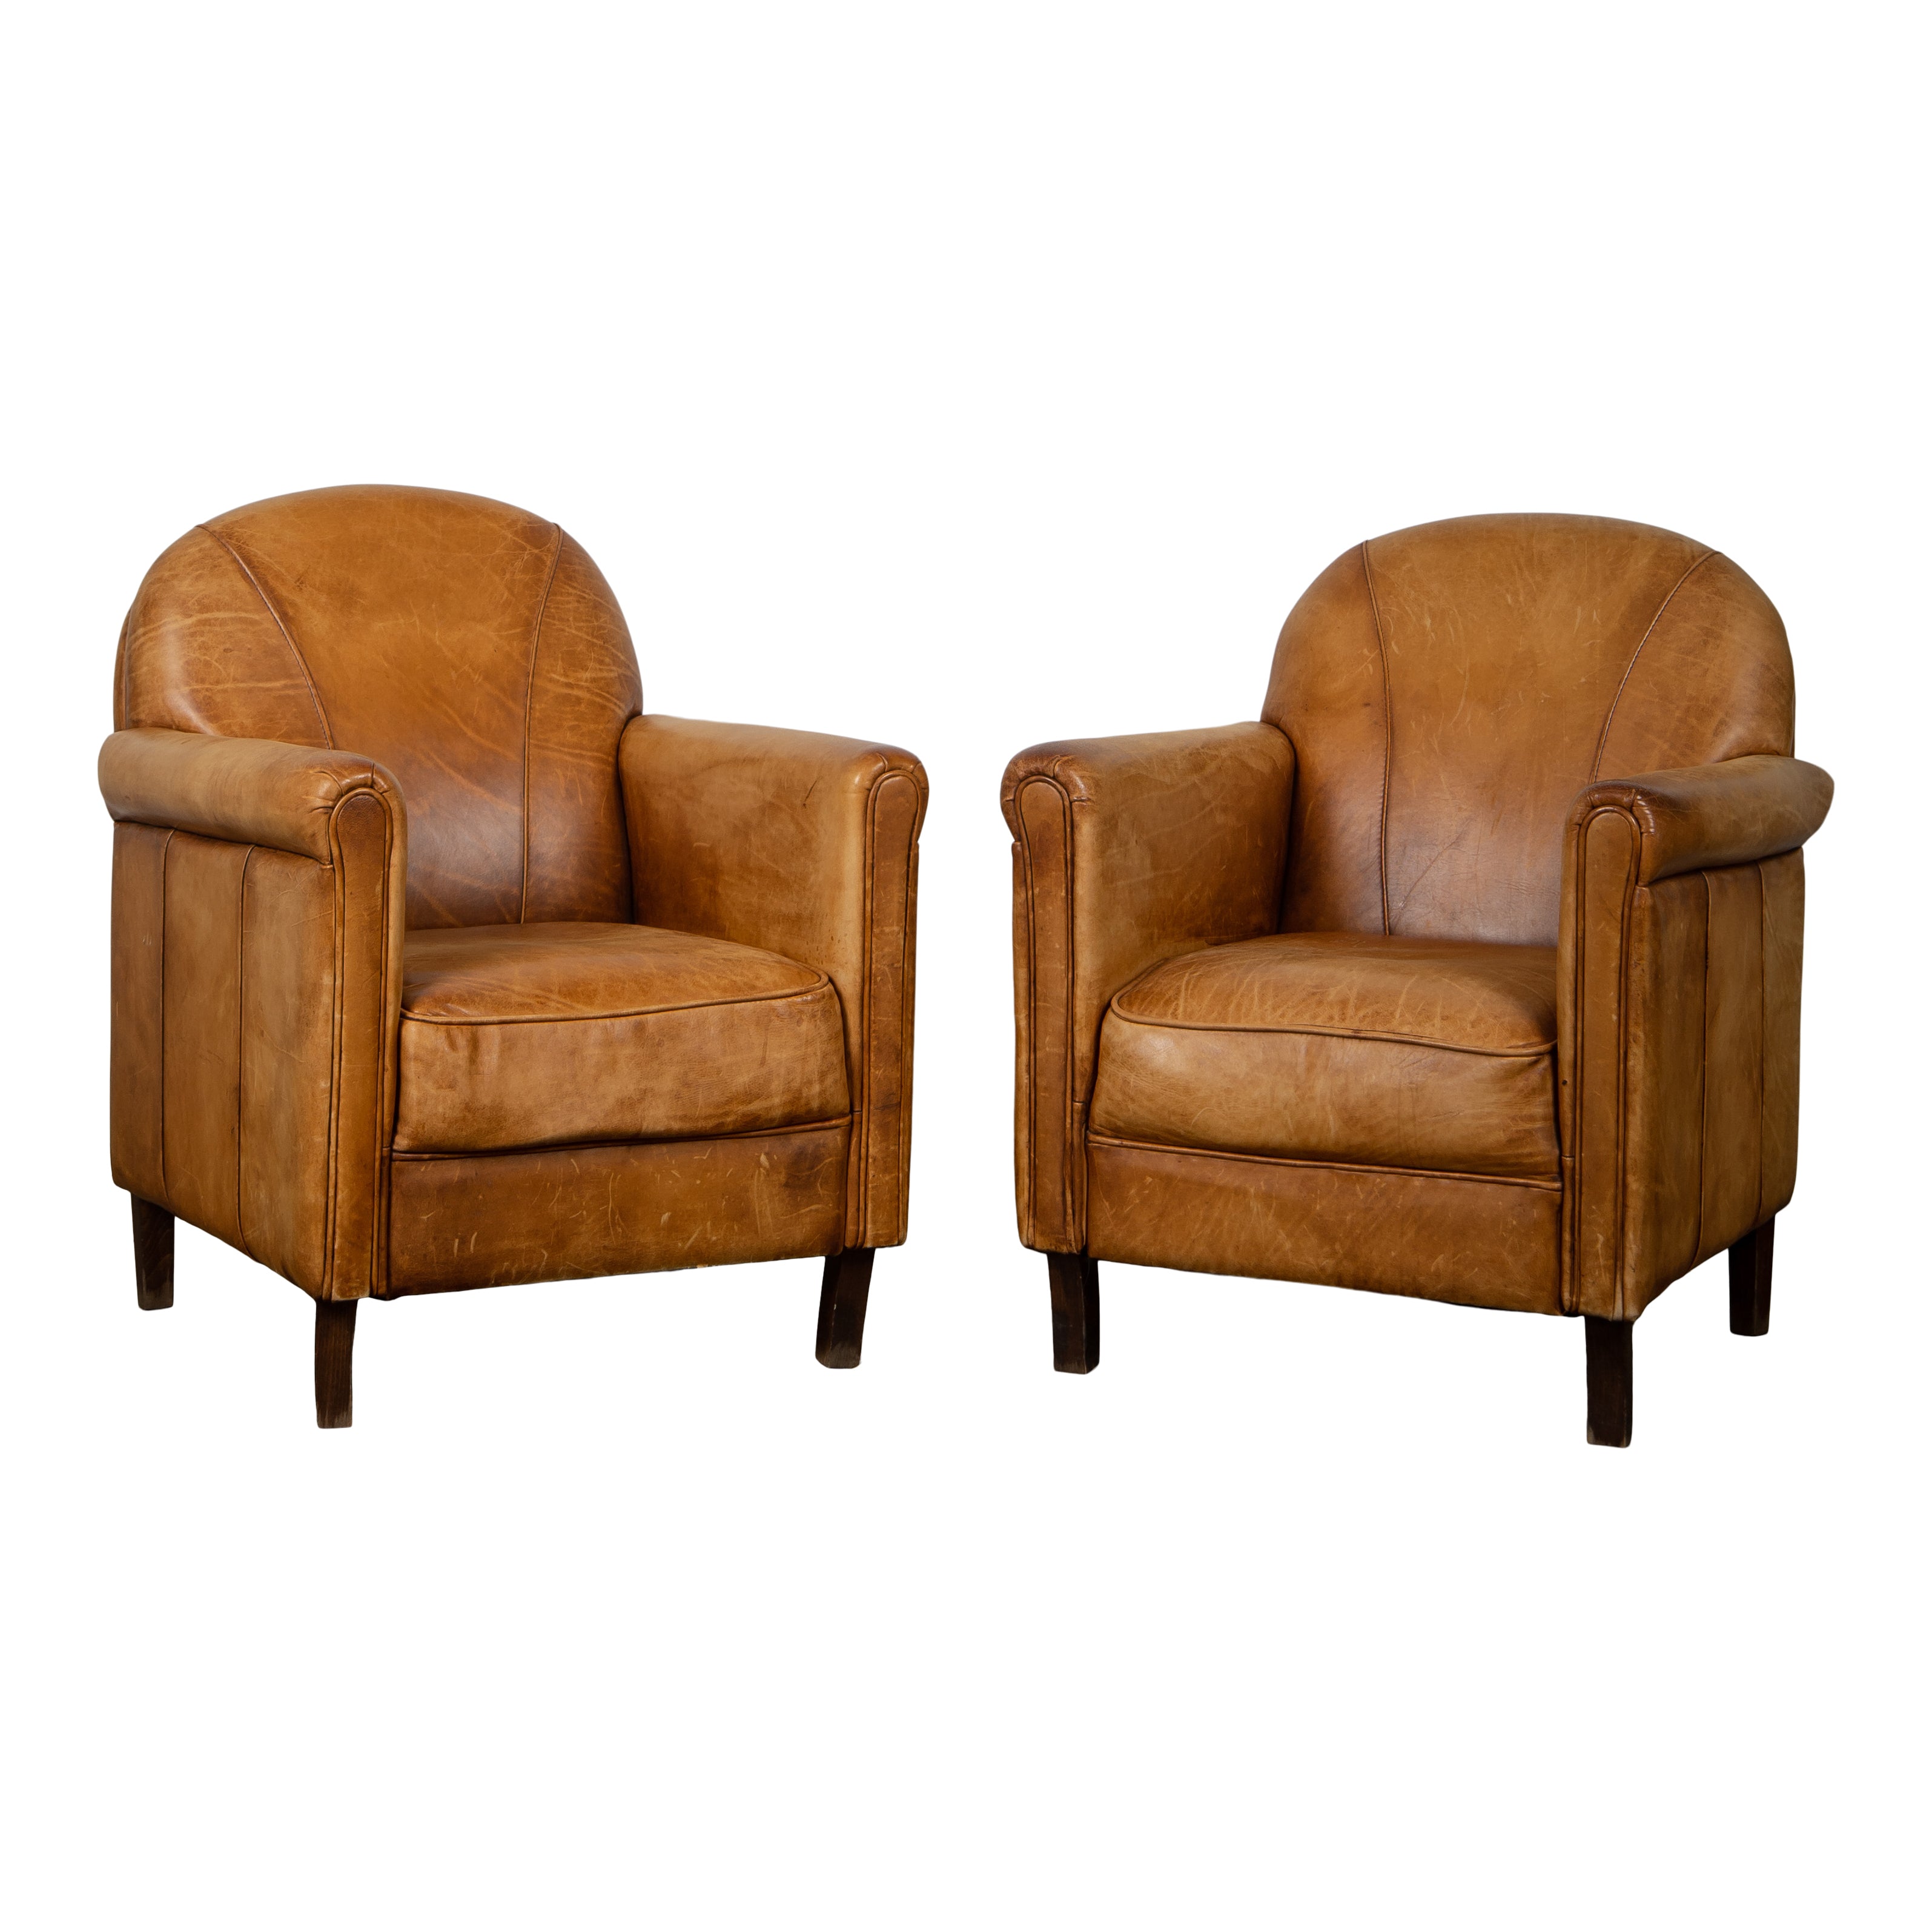 Quinton Leather Chair